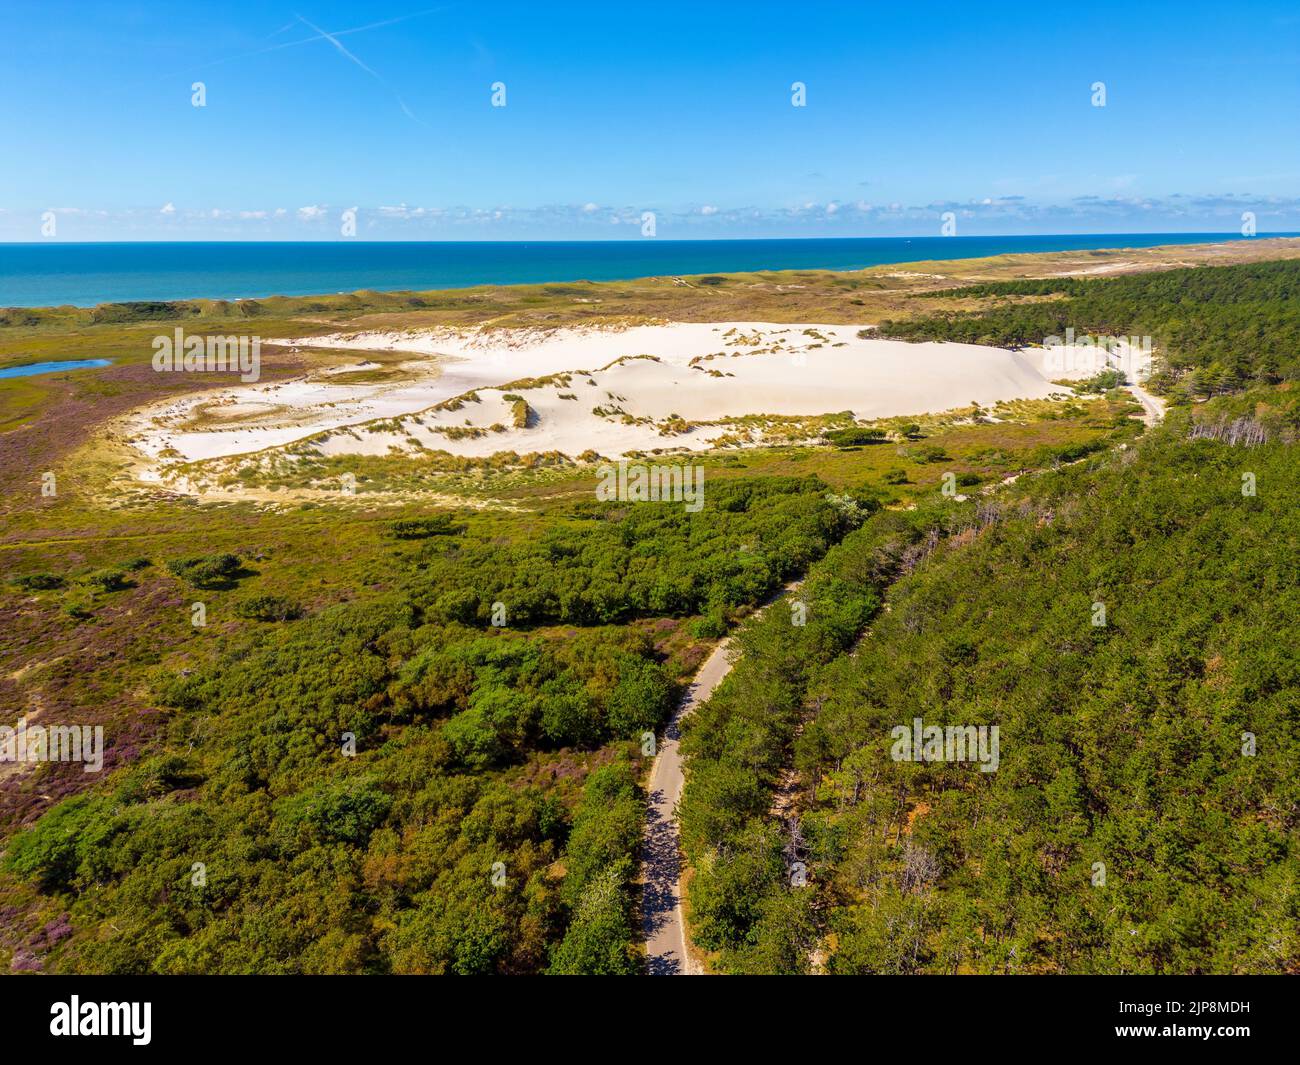 Drone point of view on Large Dune in Nature Reserve near the North Sea coast in Bergen aan Zee, Netherlands on summer day Stock Photo